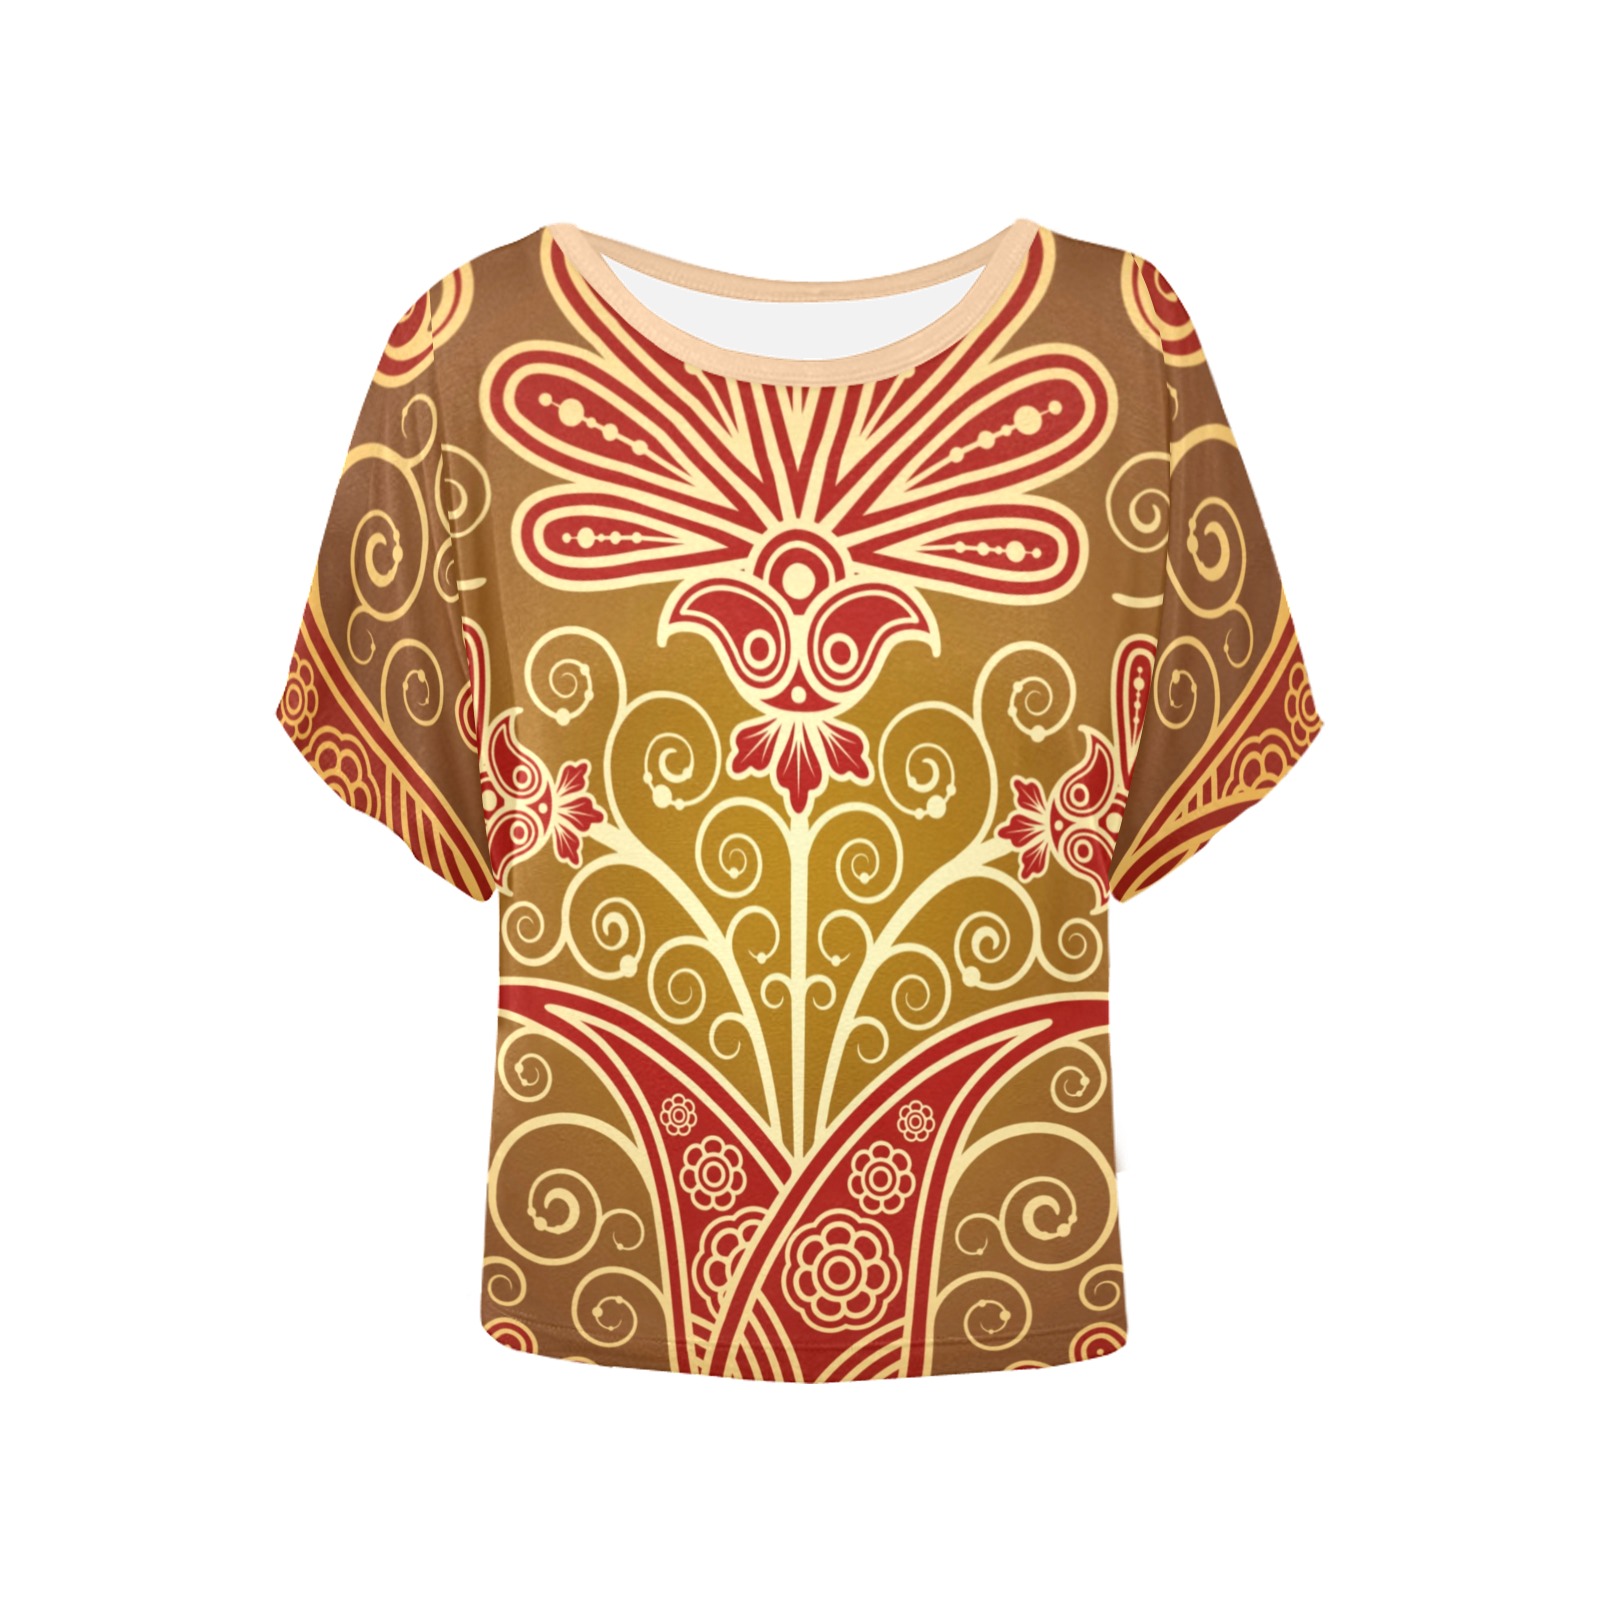 Gold and Burgundy Sari Print Pattern  Tee Women's Batwing-Sleeved Blouse T shirt (Model T44)